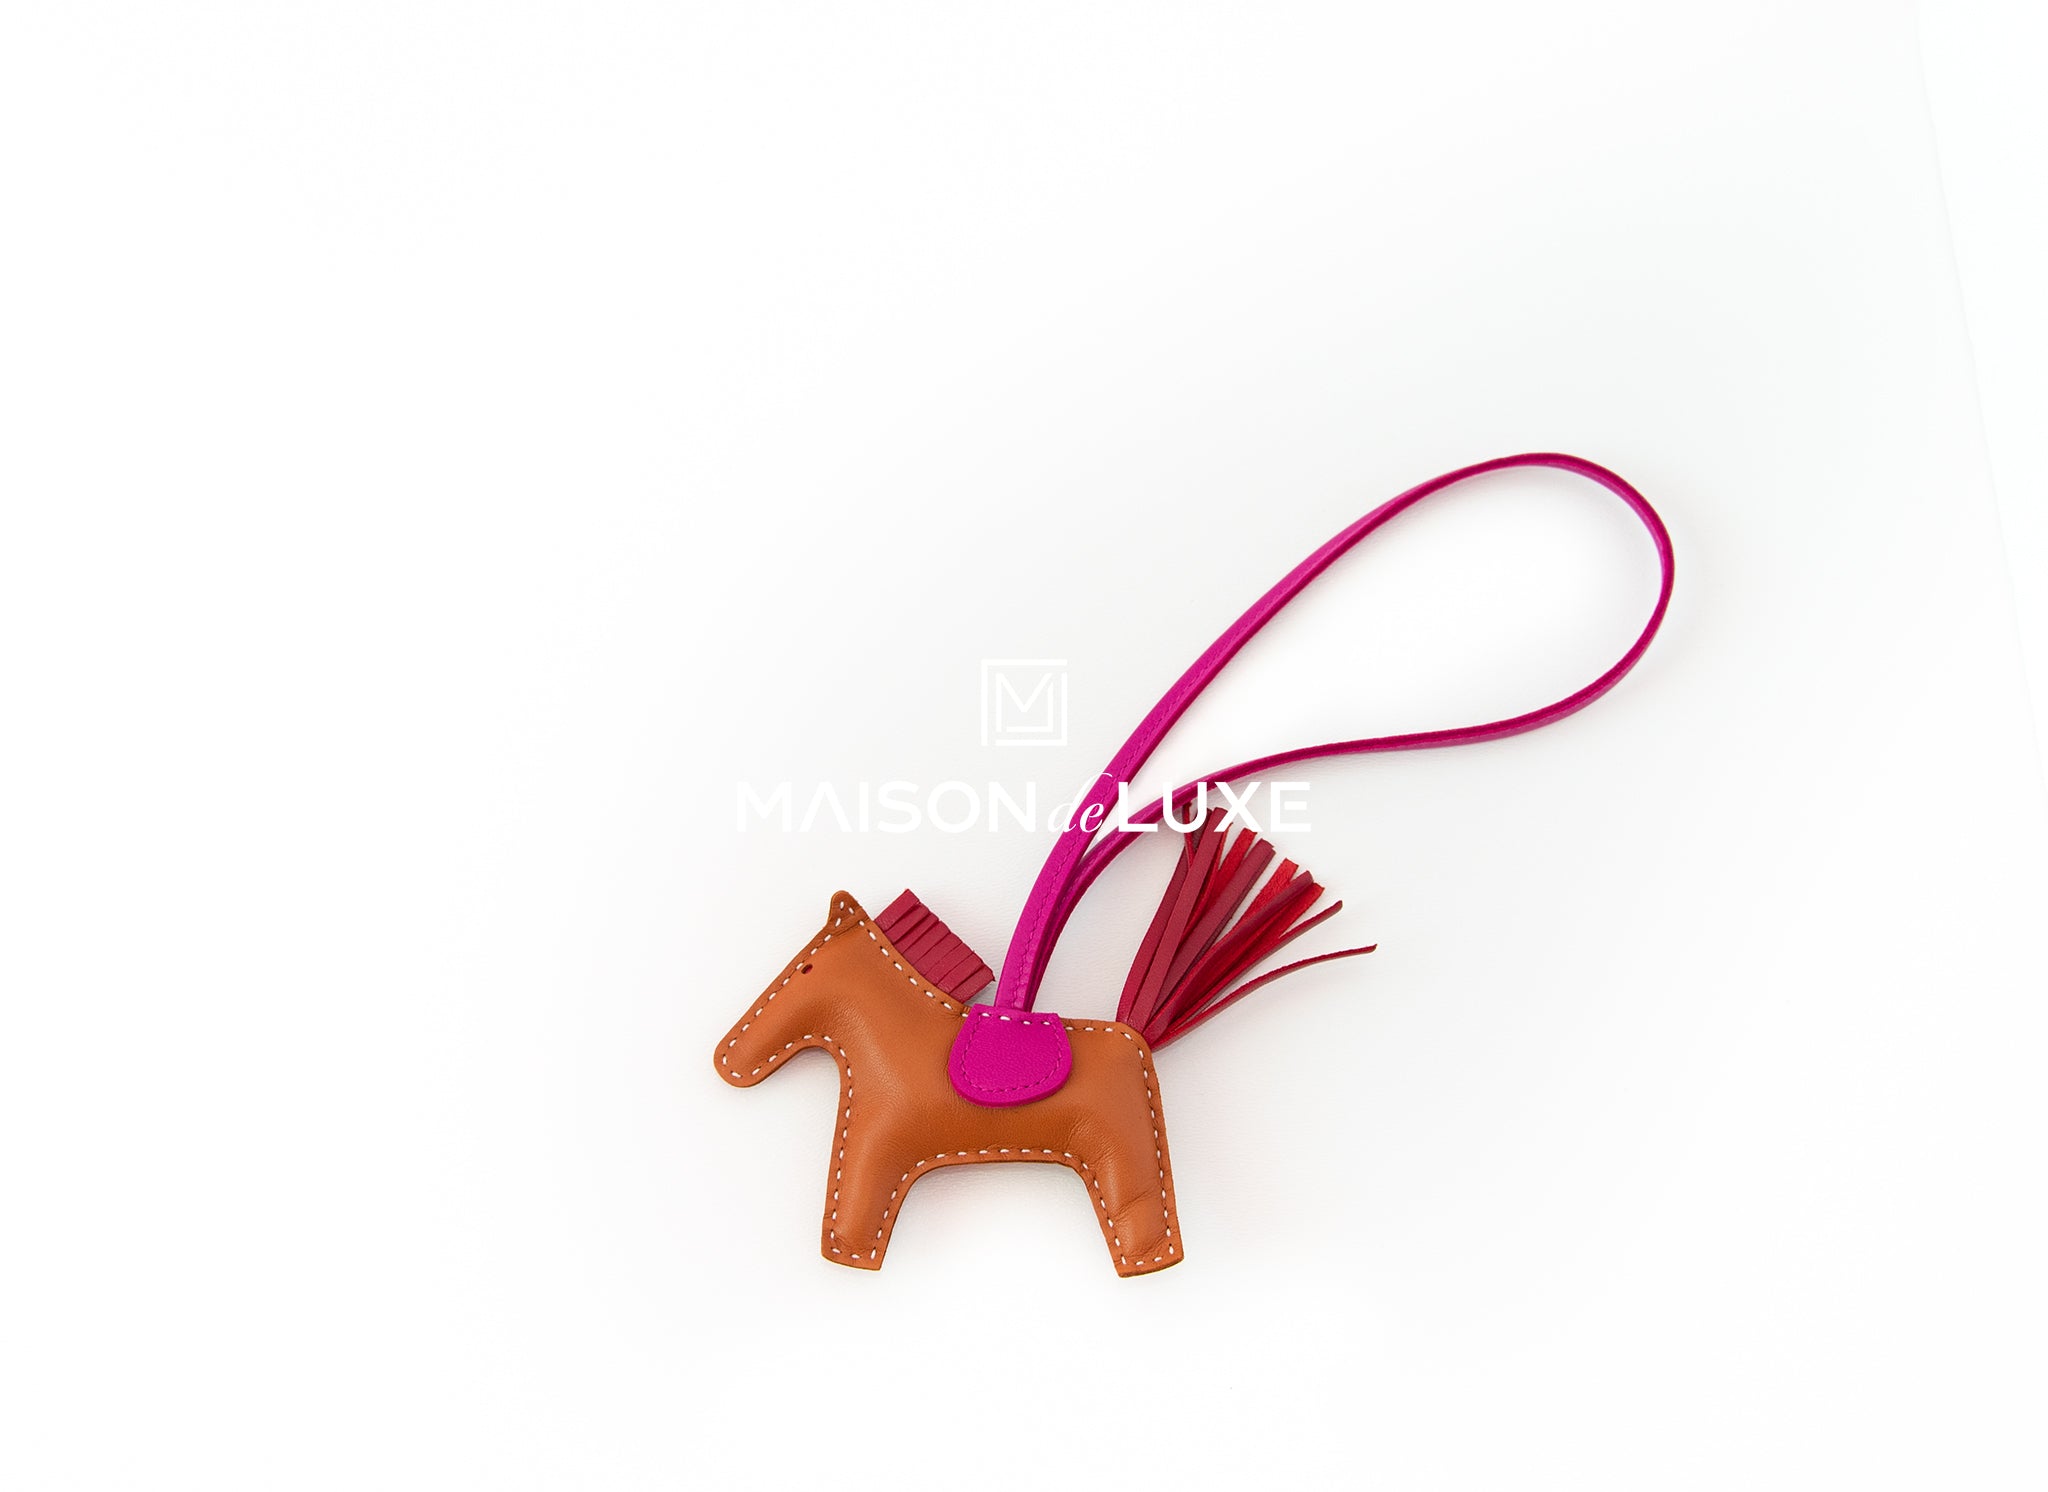 Hermes Rose Pourpre/Celeste/Gold Lambskin Leather Grigri Rodeo Horse PM Bag Charm